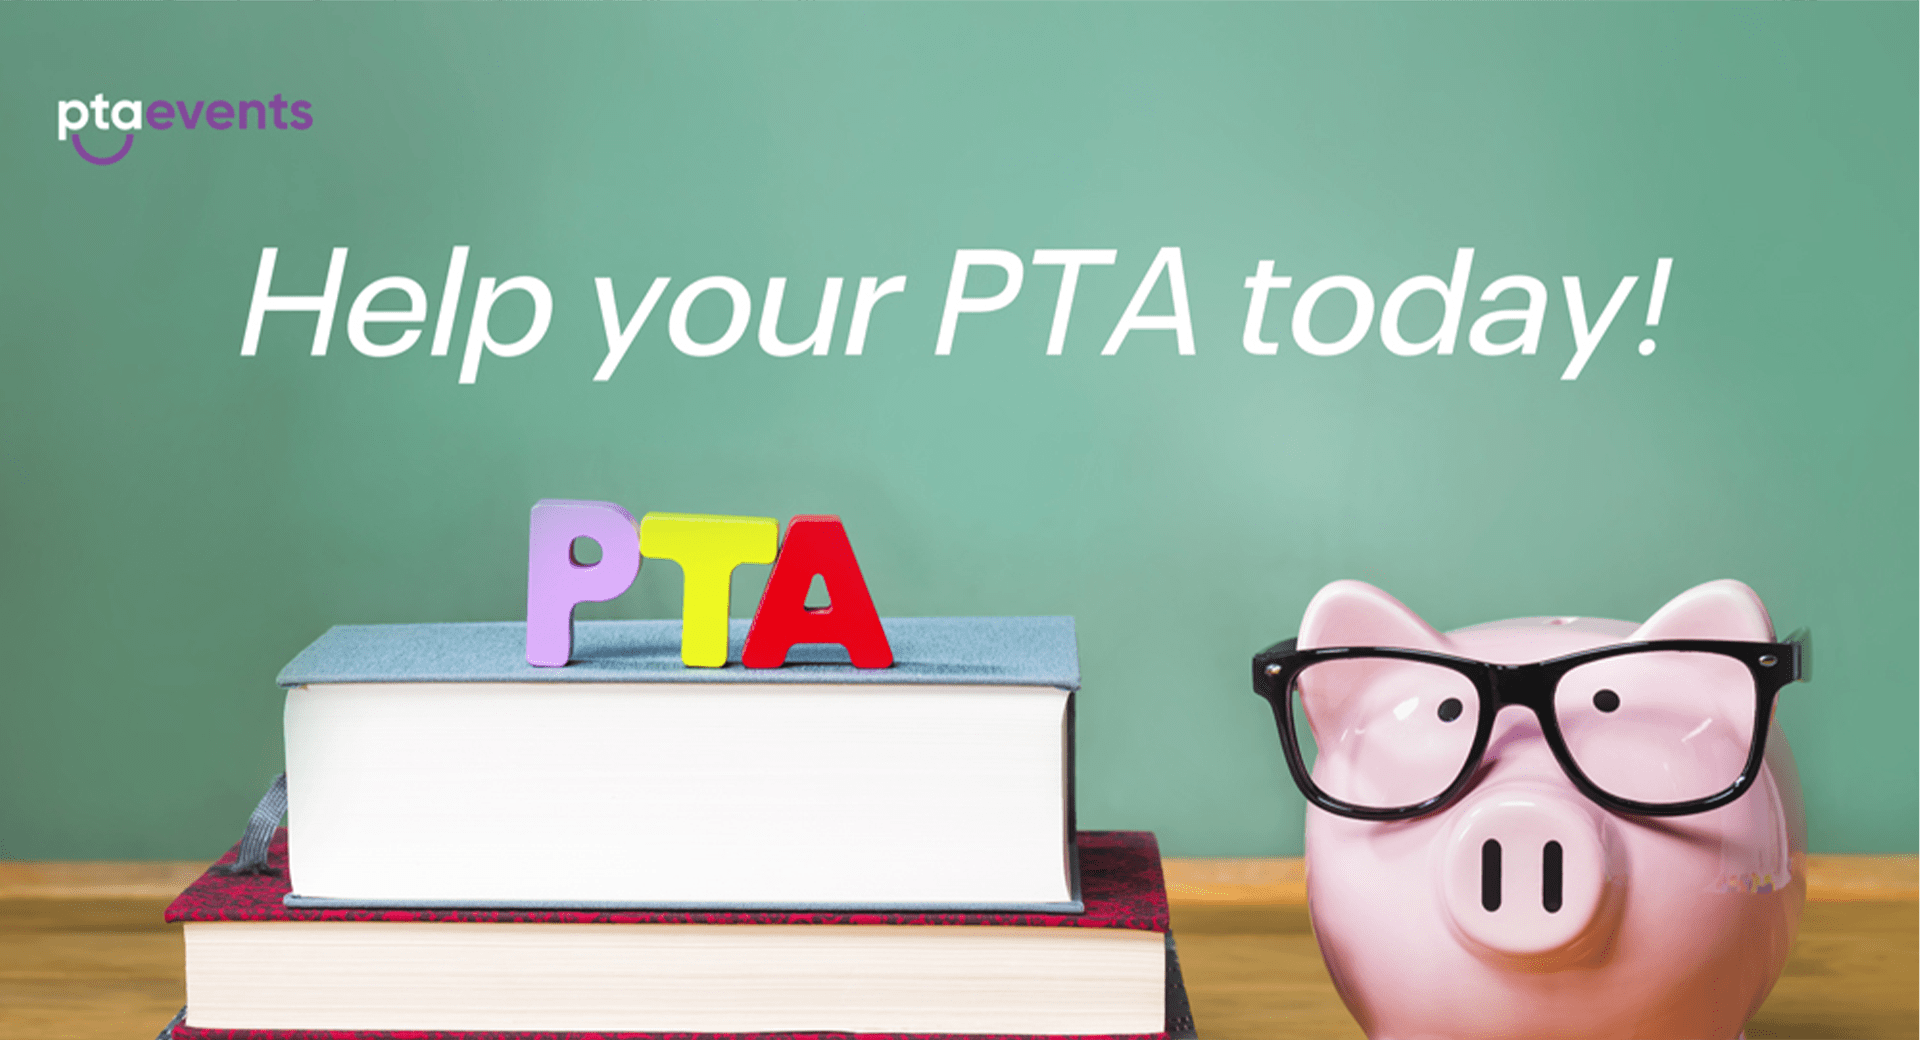 How can PTAs fundraise more effectively for your school